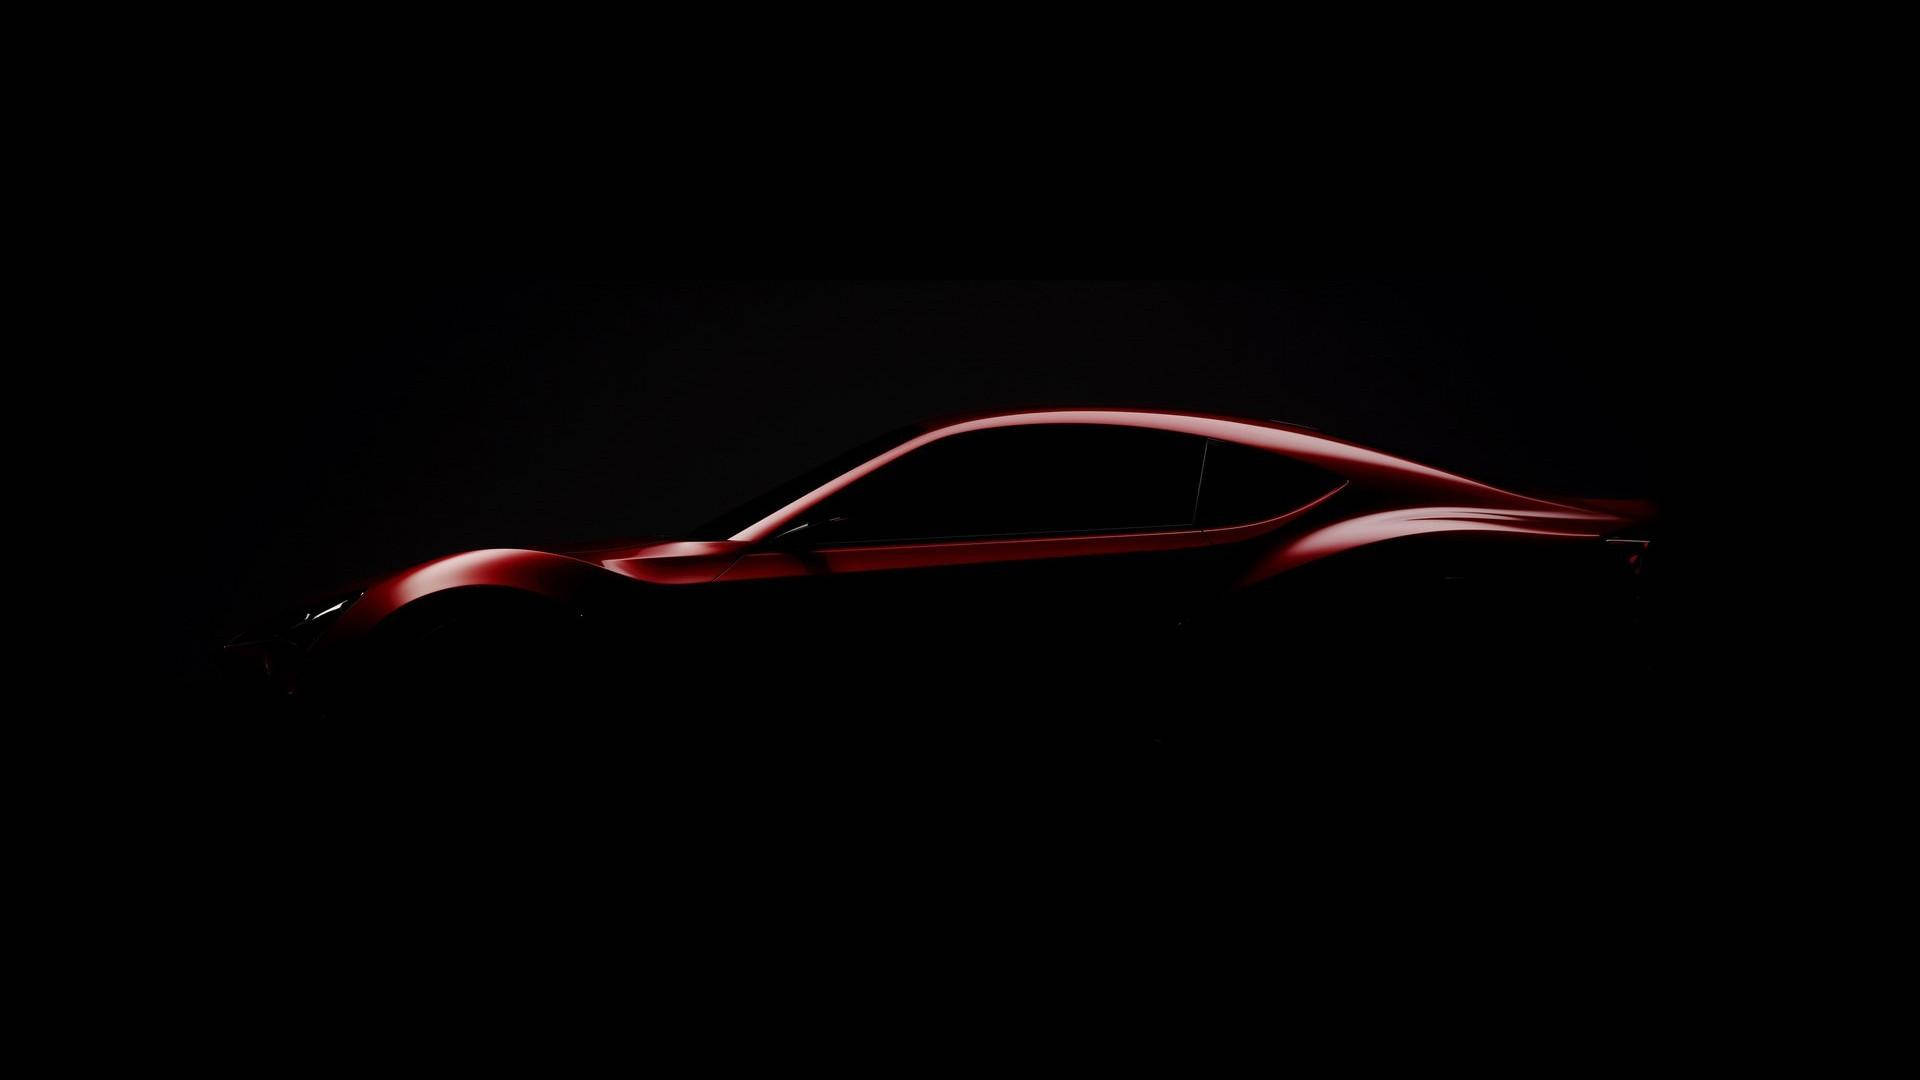 Black And Red Car In Shadows Background